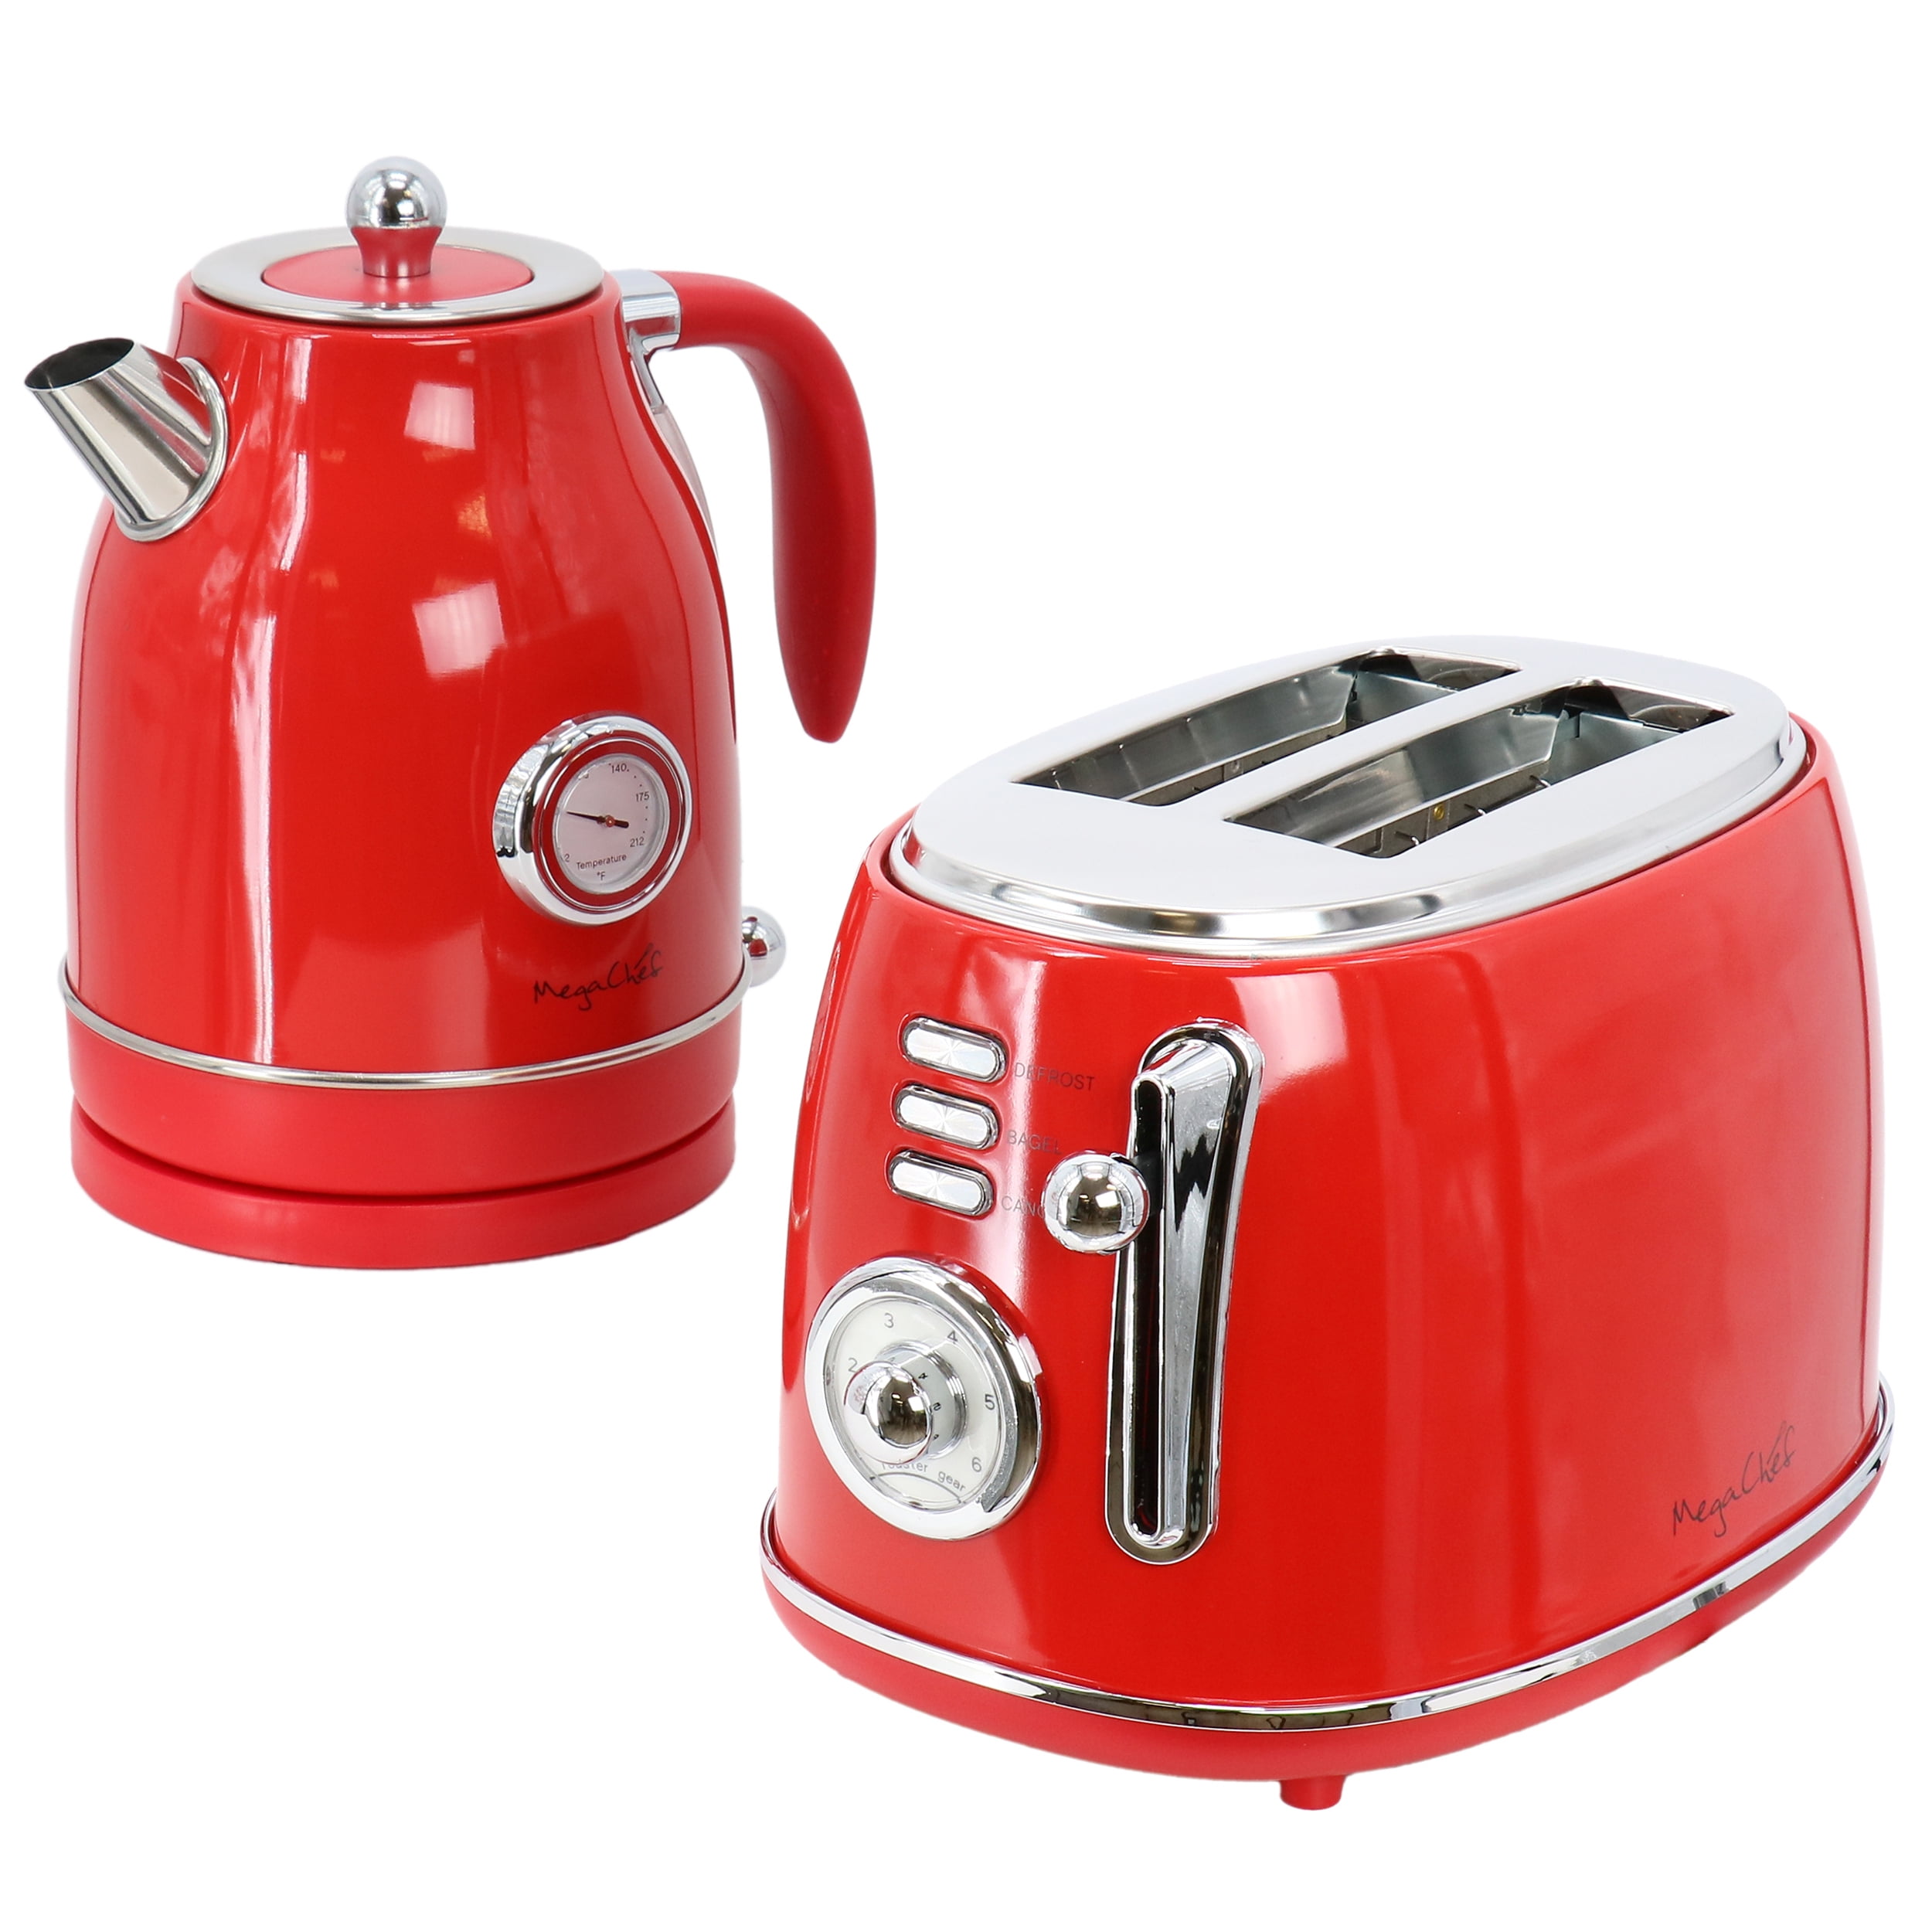 MegaChef 7 Cup Electric Tea Kettle and 2 Slice Toaster Combo in